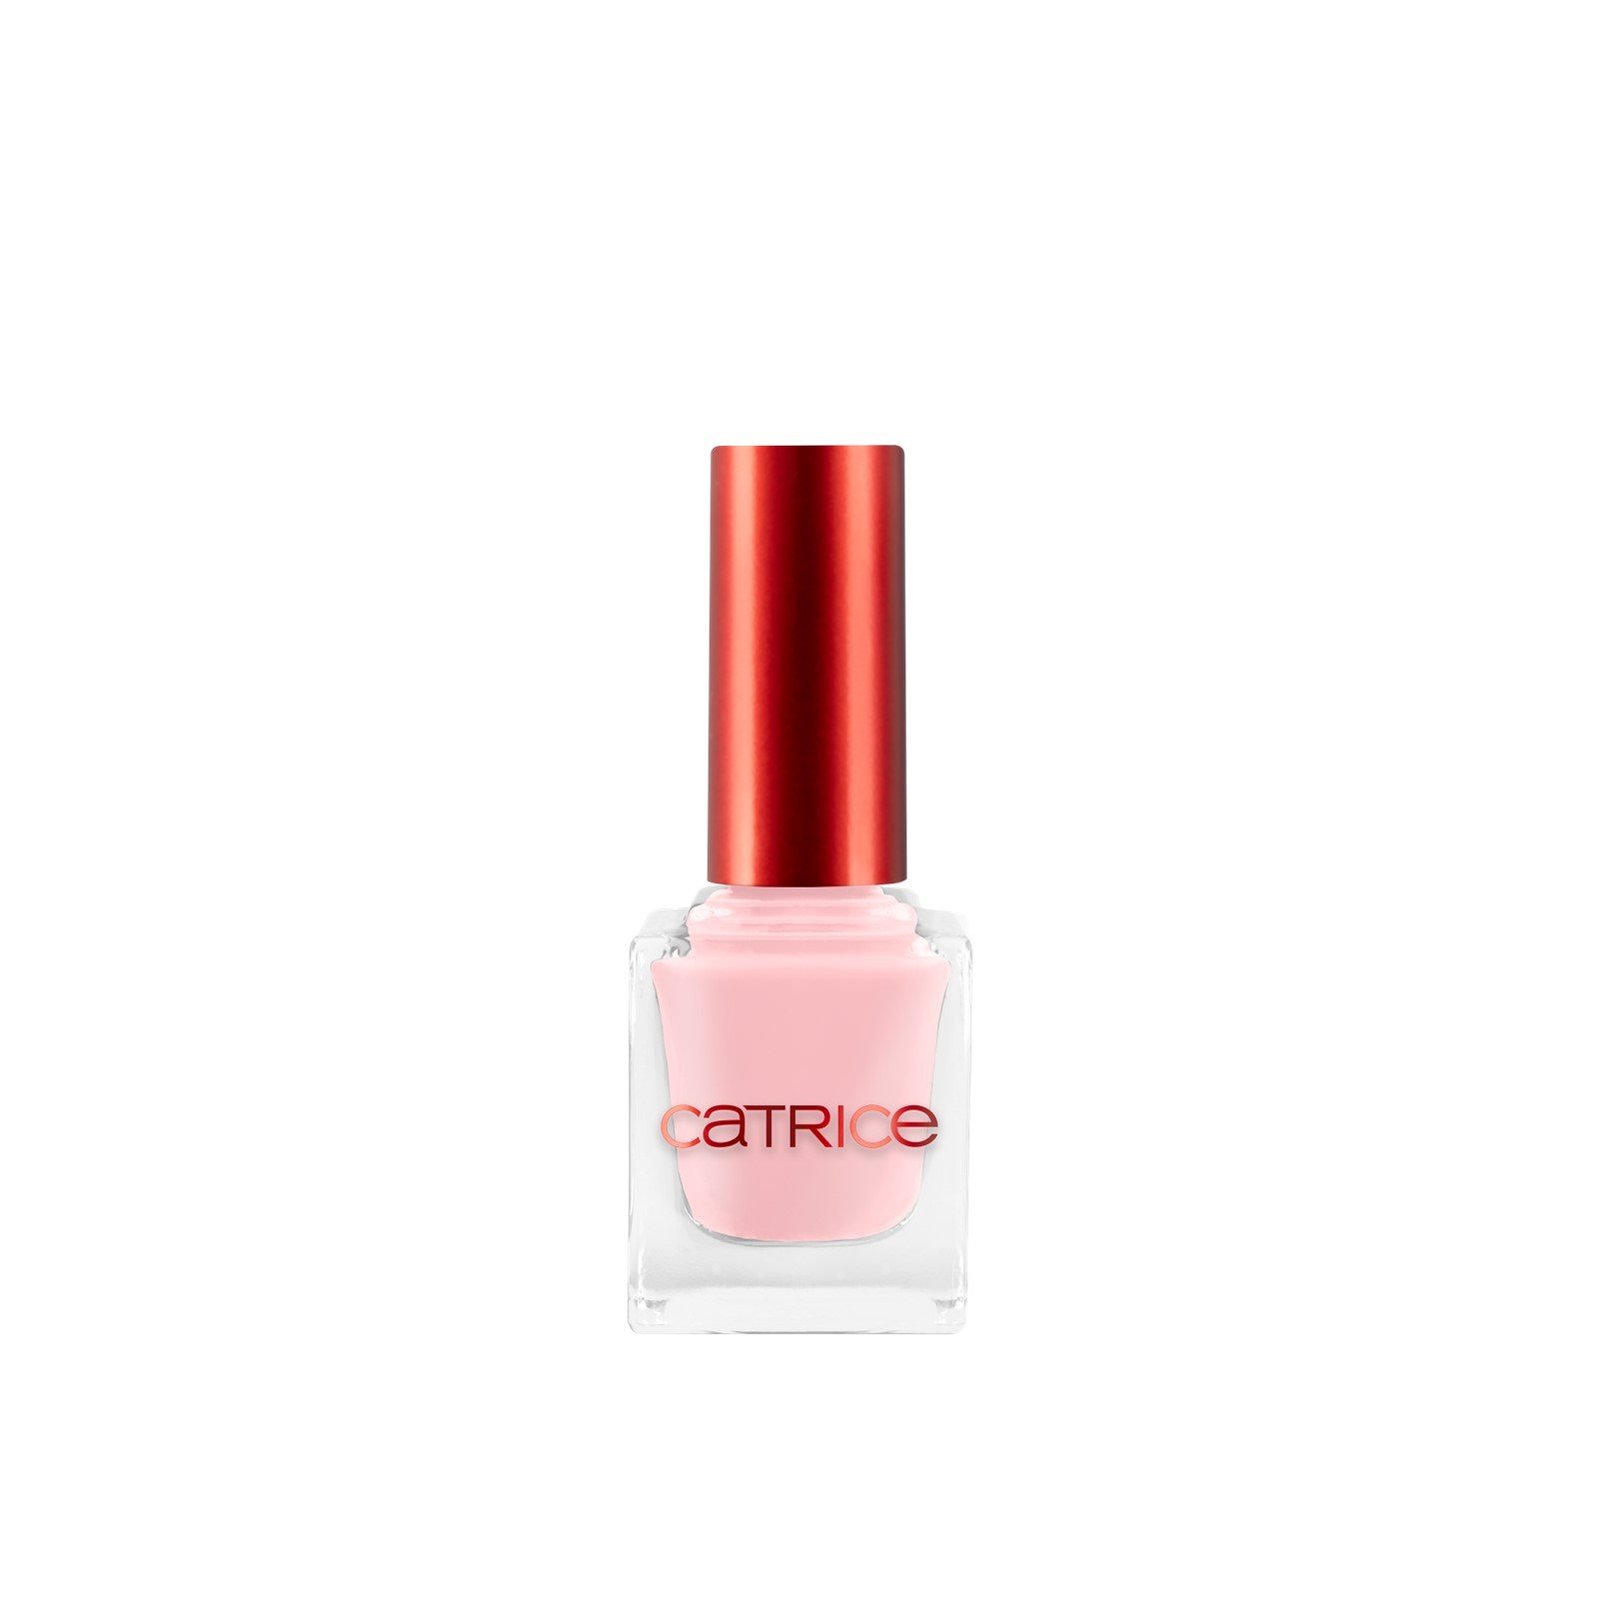 Catrice Heart Affair Nail Lacquer 02 Crazy In Love 10.5ml